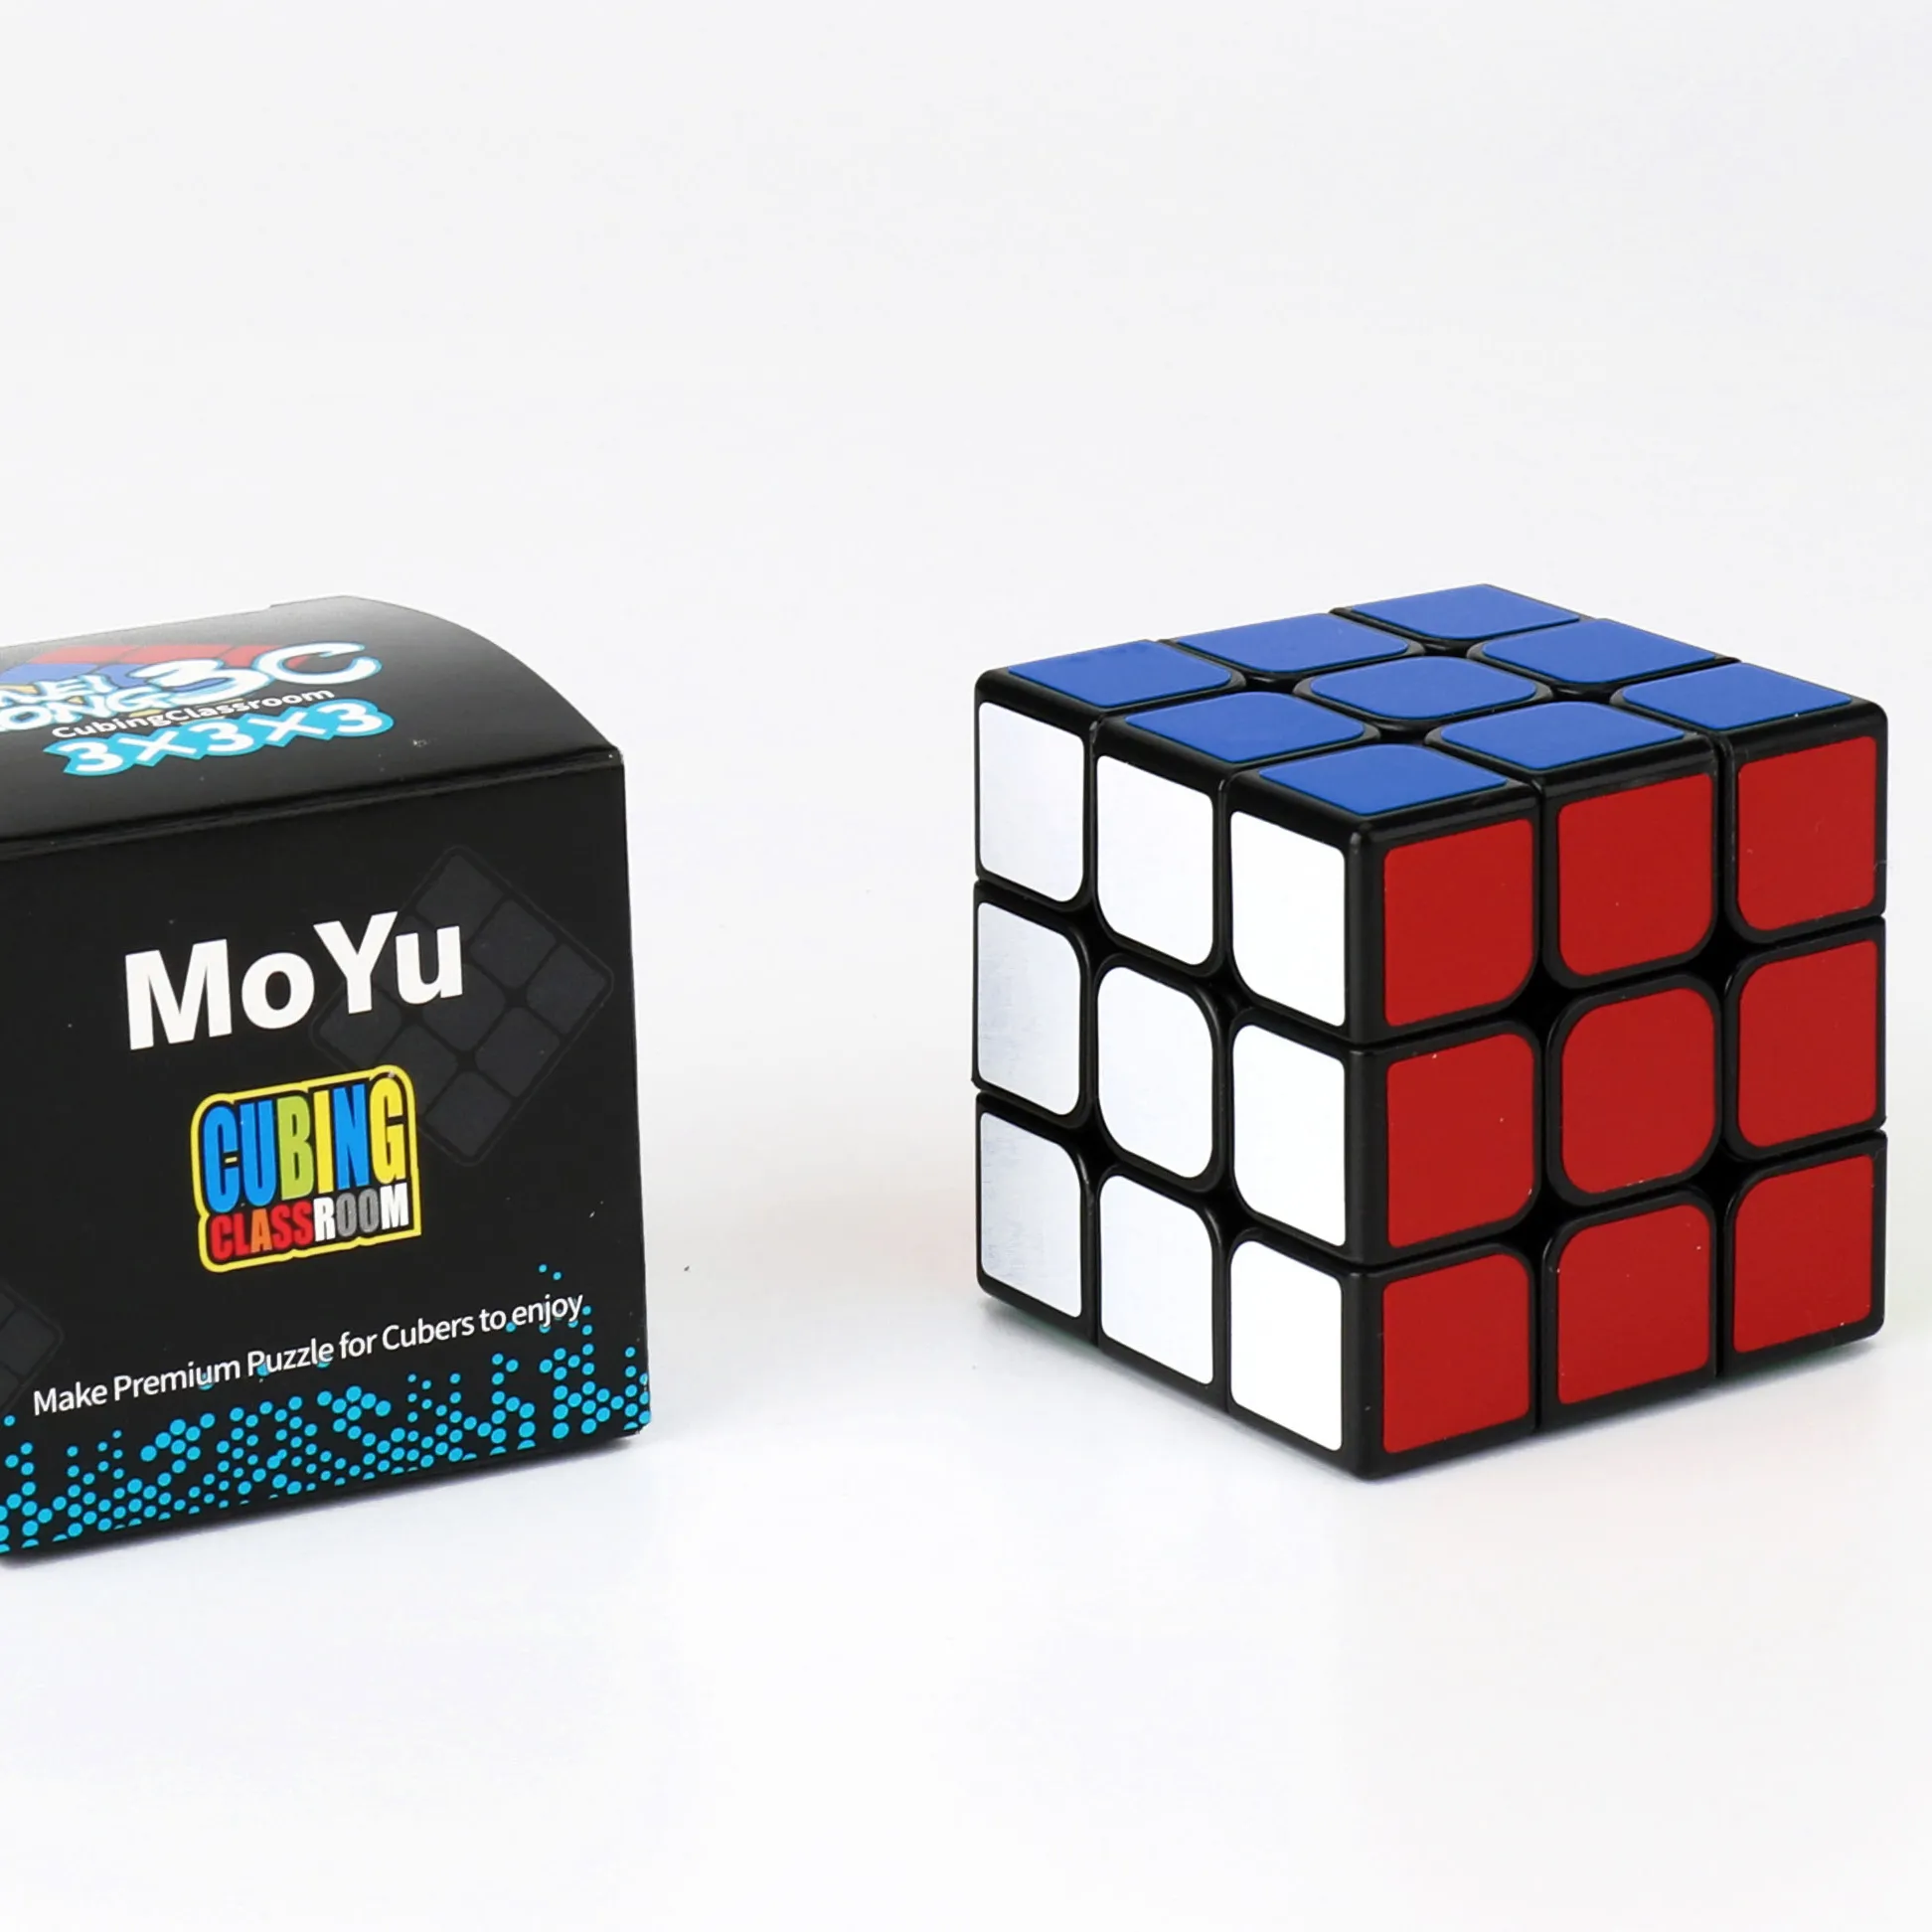 MOYU 3D Magic Cube Puzzle sticker Smooth Speed cube Black -Twist Brain Teasers IQ Toys Gift for kids